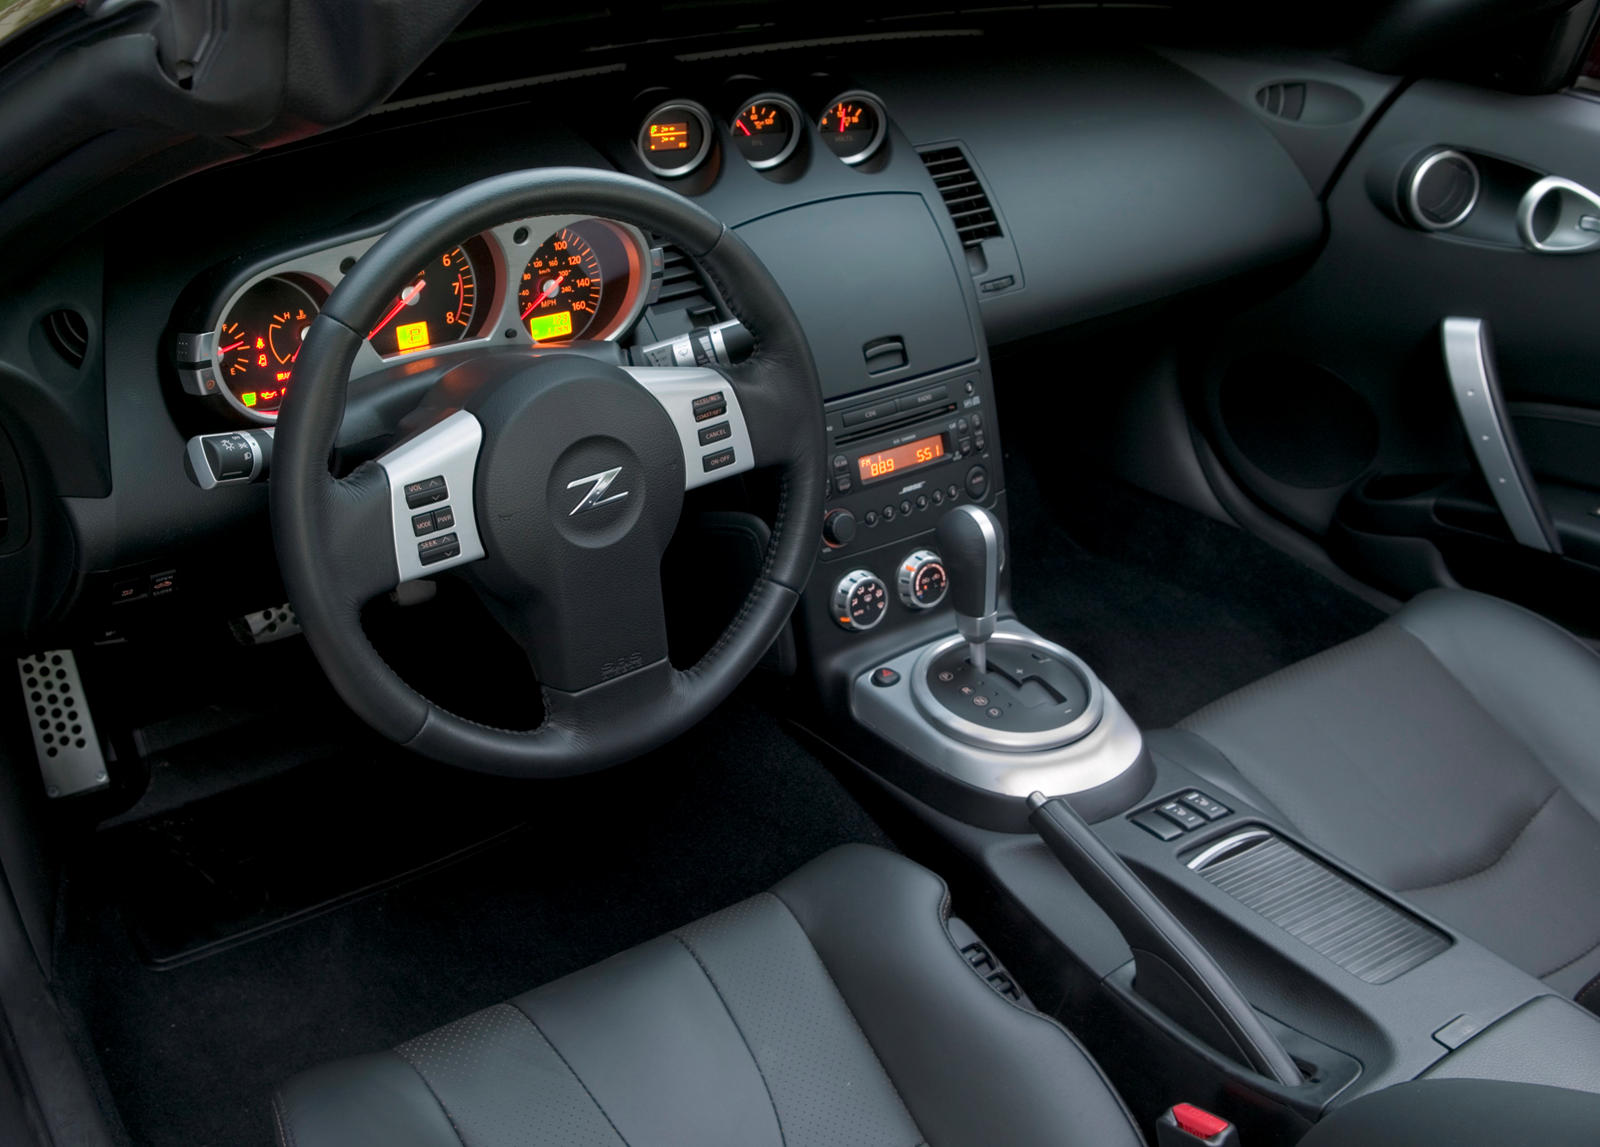 2008 Nissan 350Z Coupe Dashboard